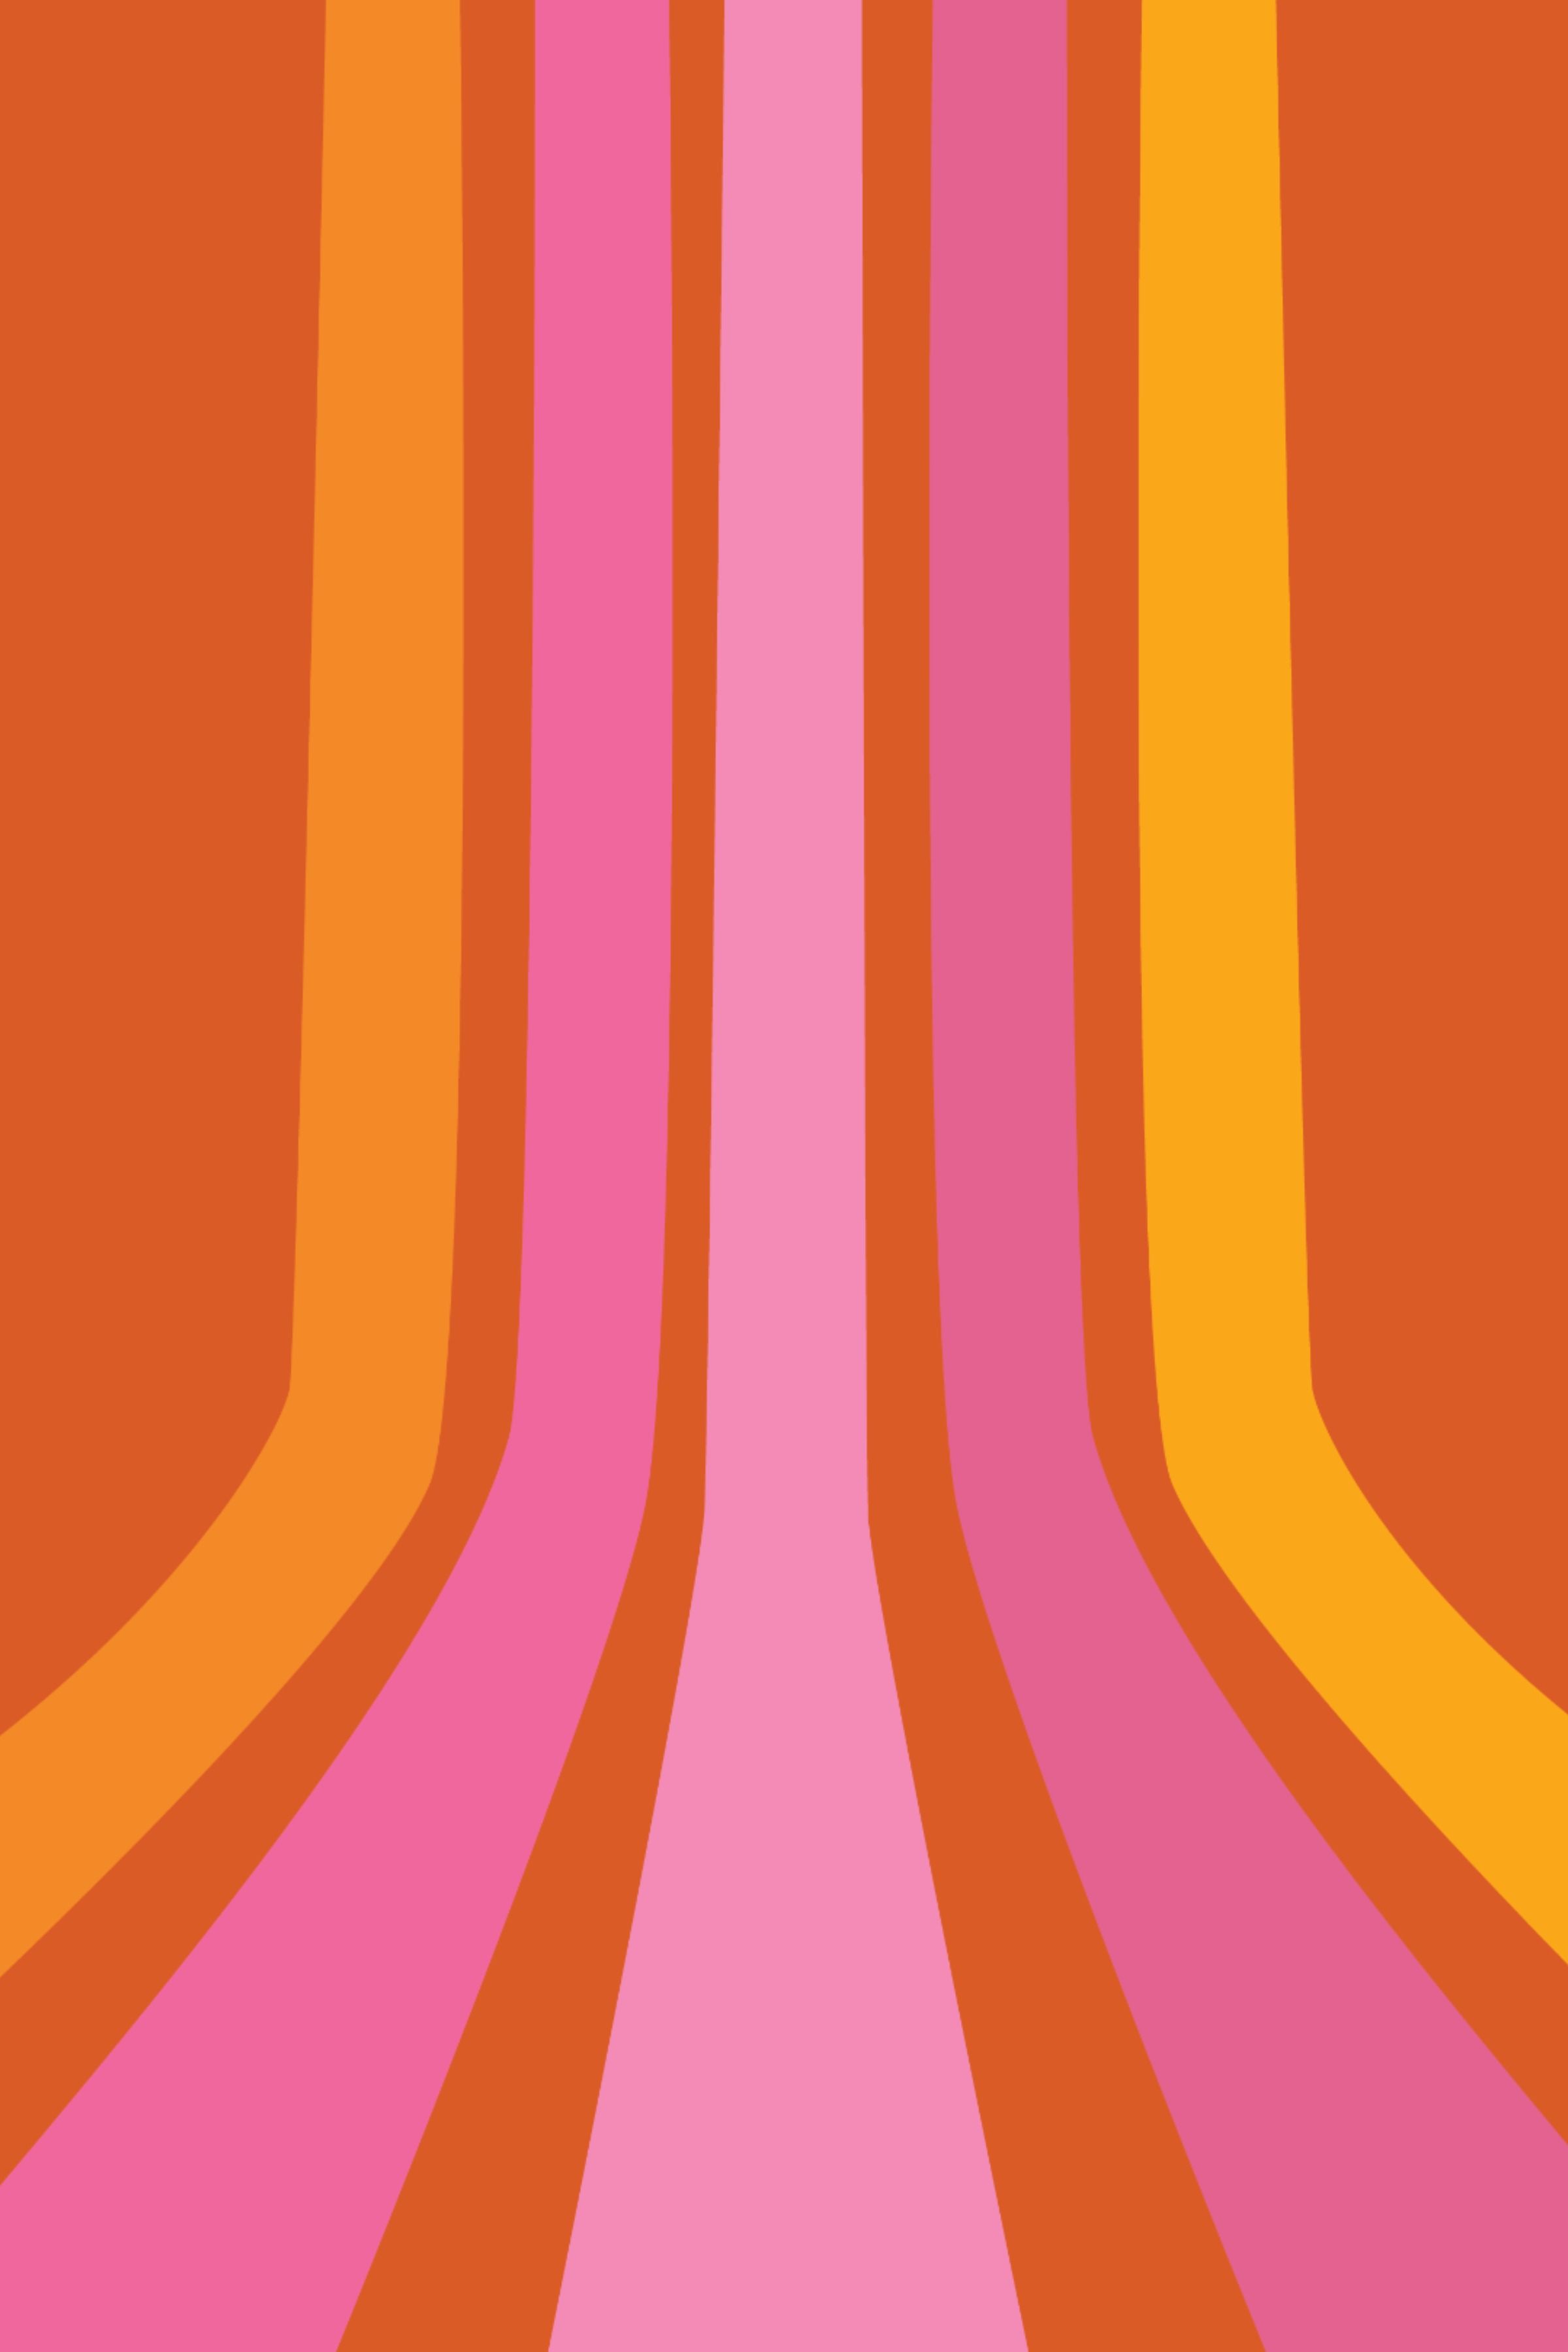 Groovy retro rainbow colored lines on a warm pink background - 70s